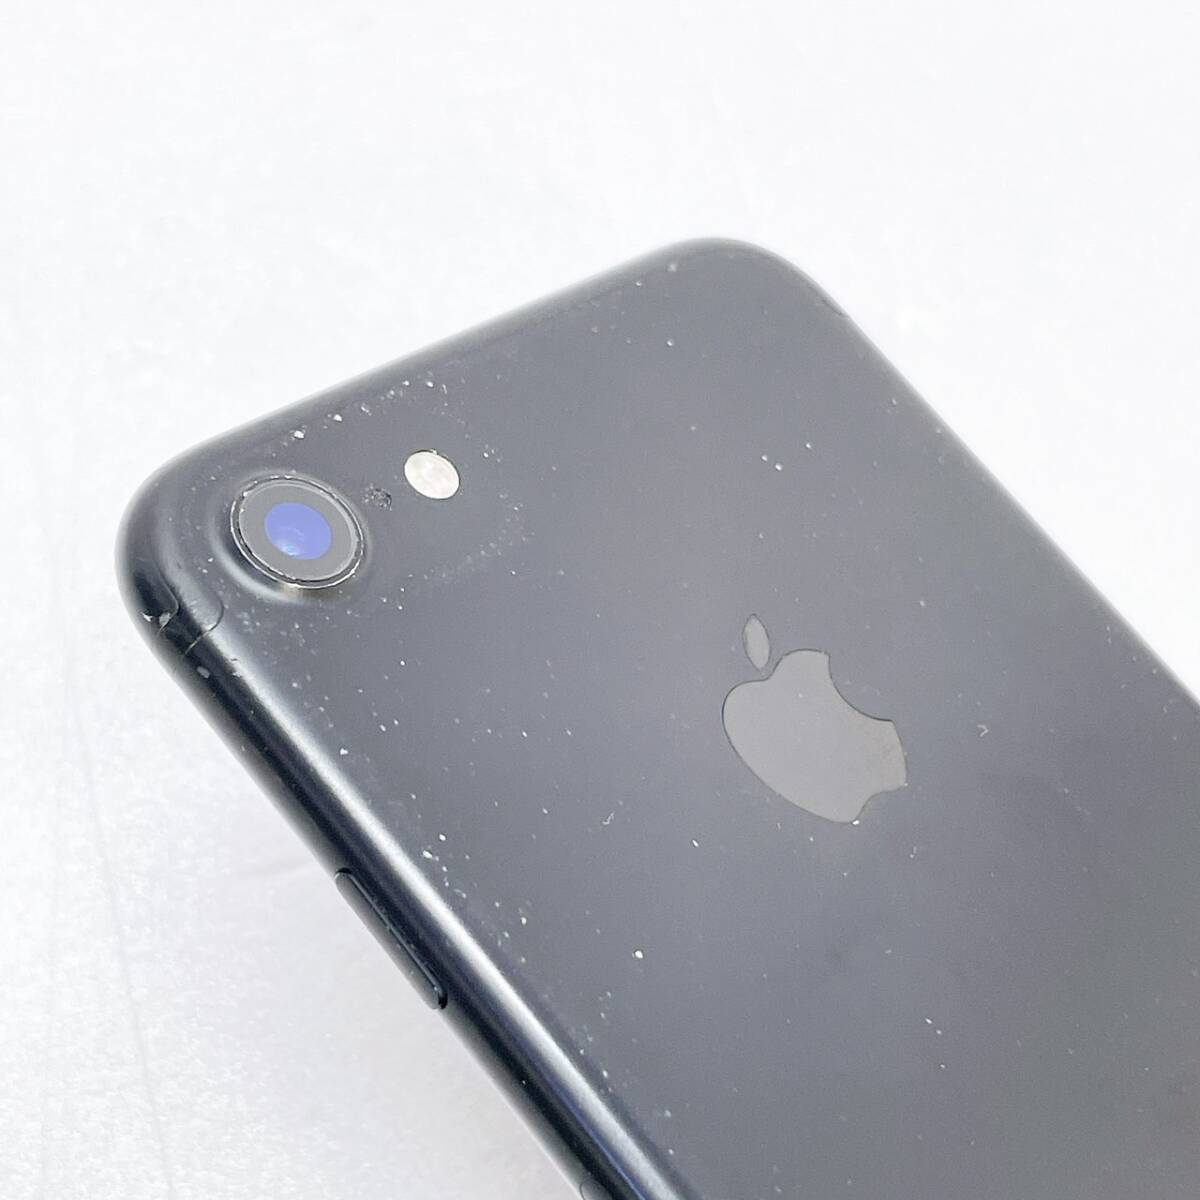 【DHS1990AT】iPhone7 32GB MNCE2J/A A1779 ブラック 判定○ SIMロックあり 表示 IMEI:355851083564556 画面割れありの画像8